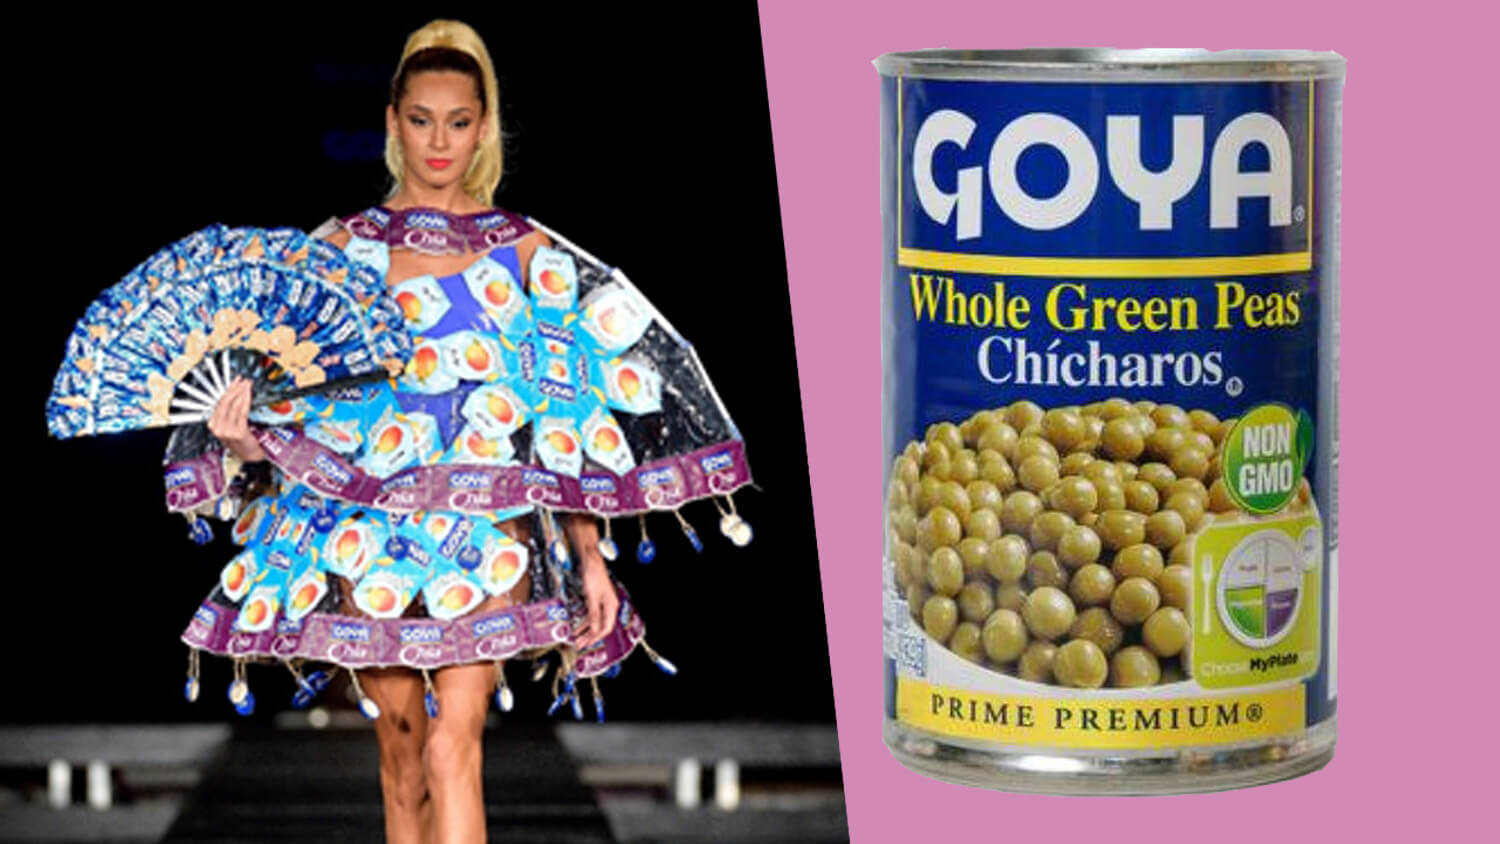 Miami Fashion Show Featured Vegan Clothes Made From Goya’s Rice and Beans